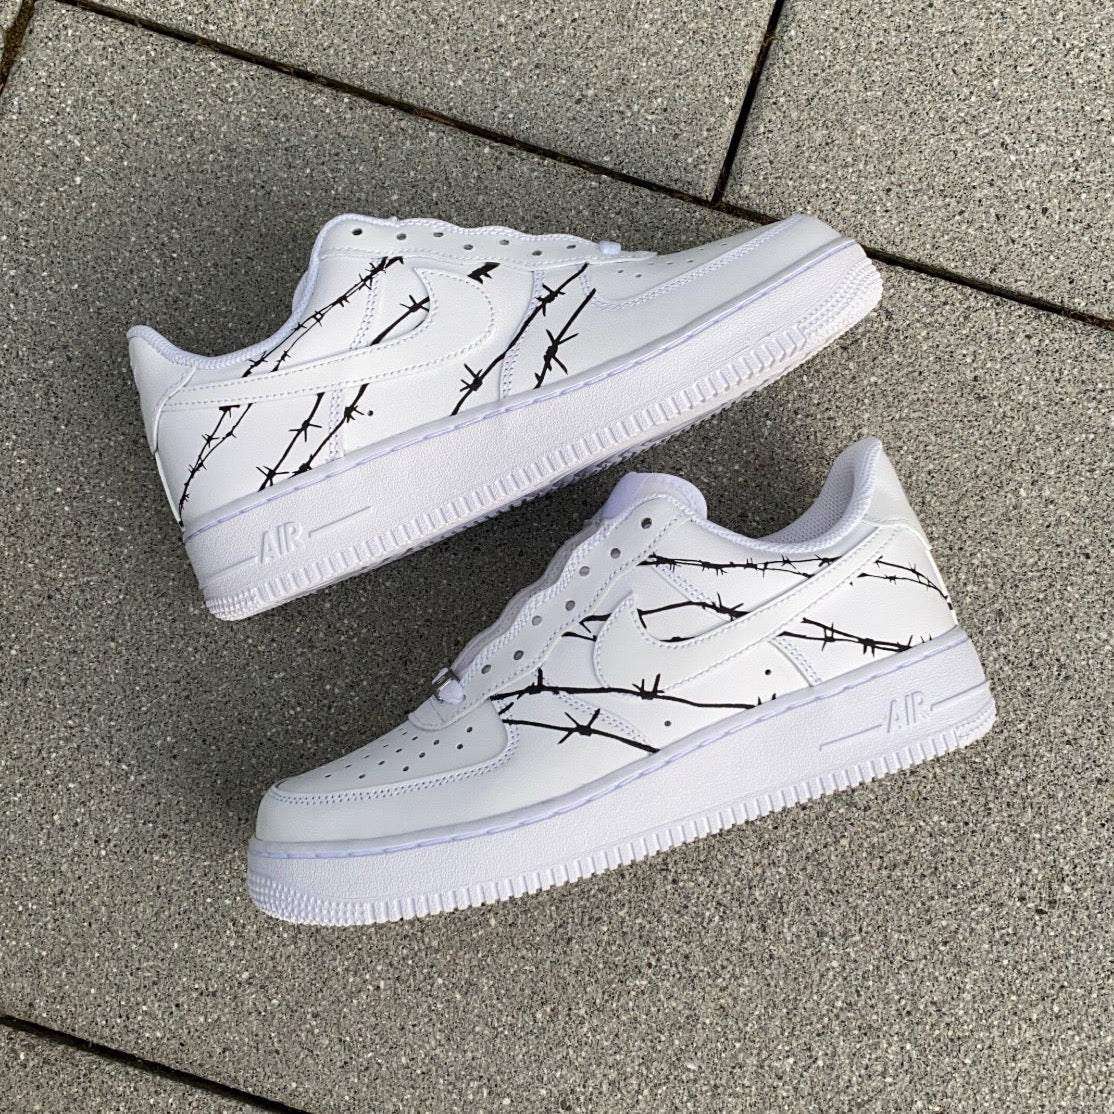 BARBED WIRE NIKE AIR FORCE 1 - NOVEL Aaron Schröer-High Quality Custom Sneaker